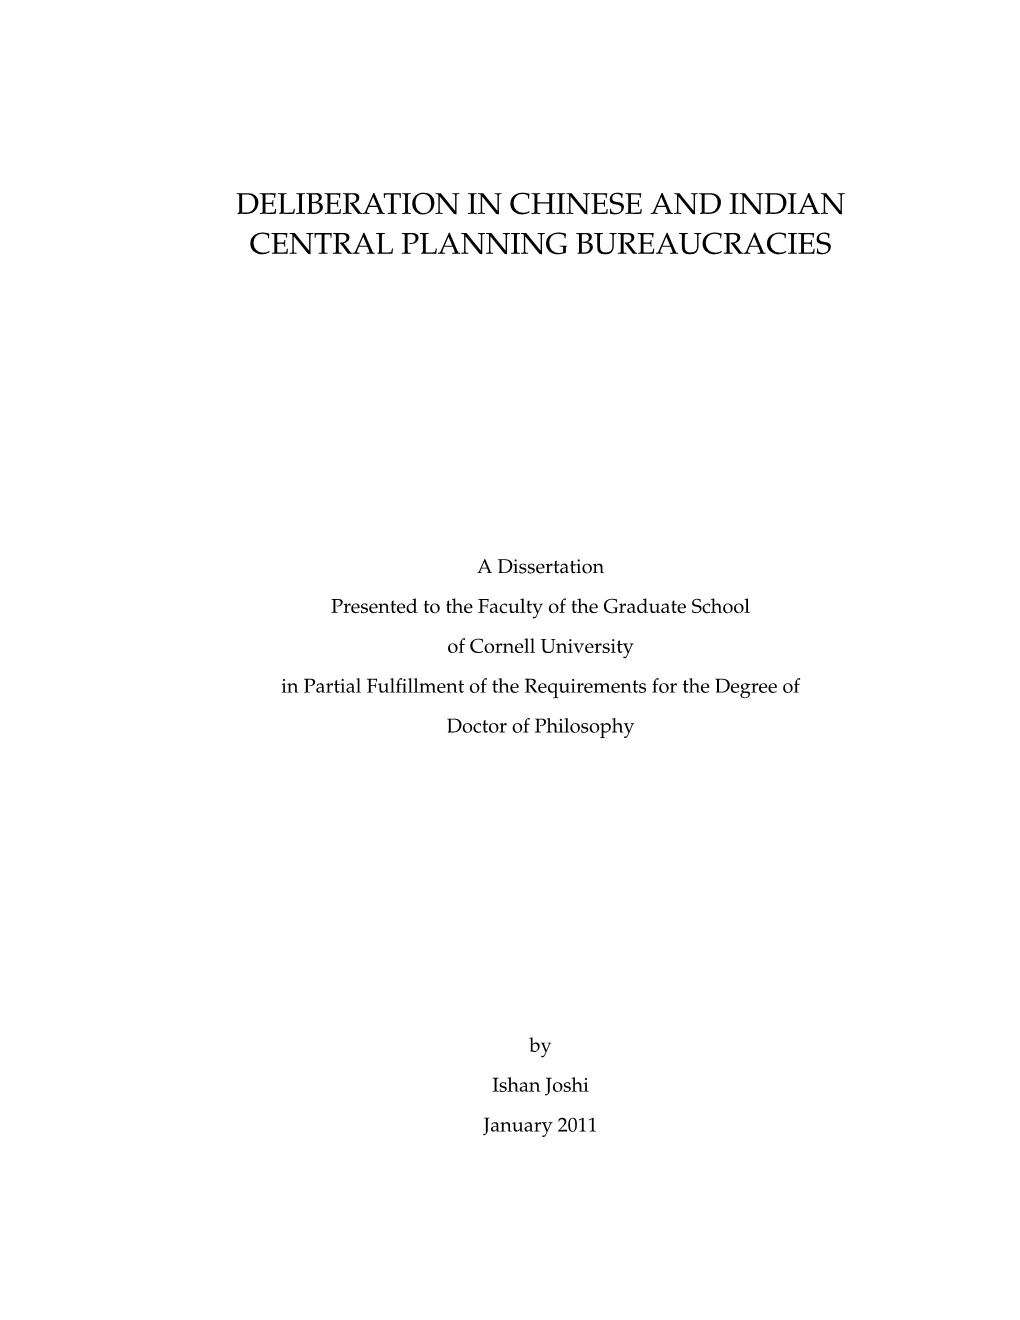 Deliberation in Chinese and Indian Central Planning Bureaucracies